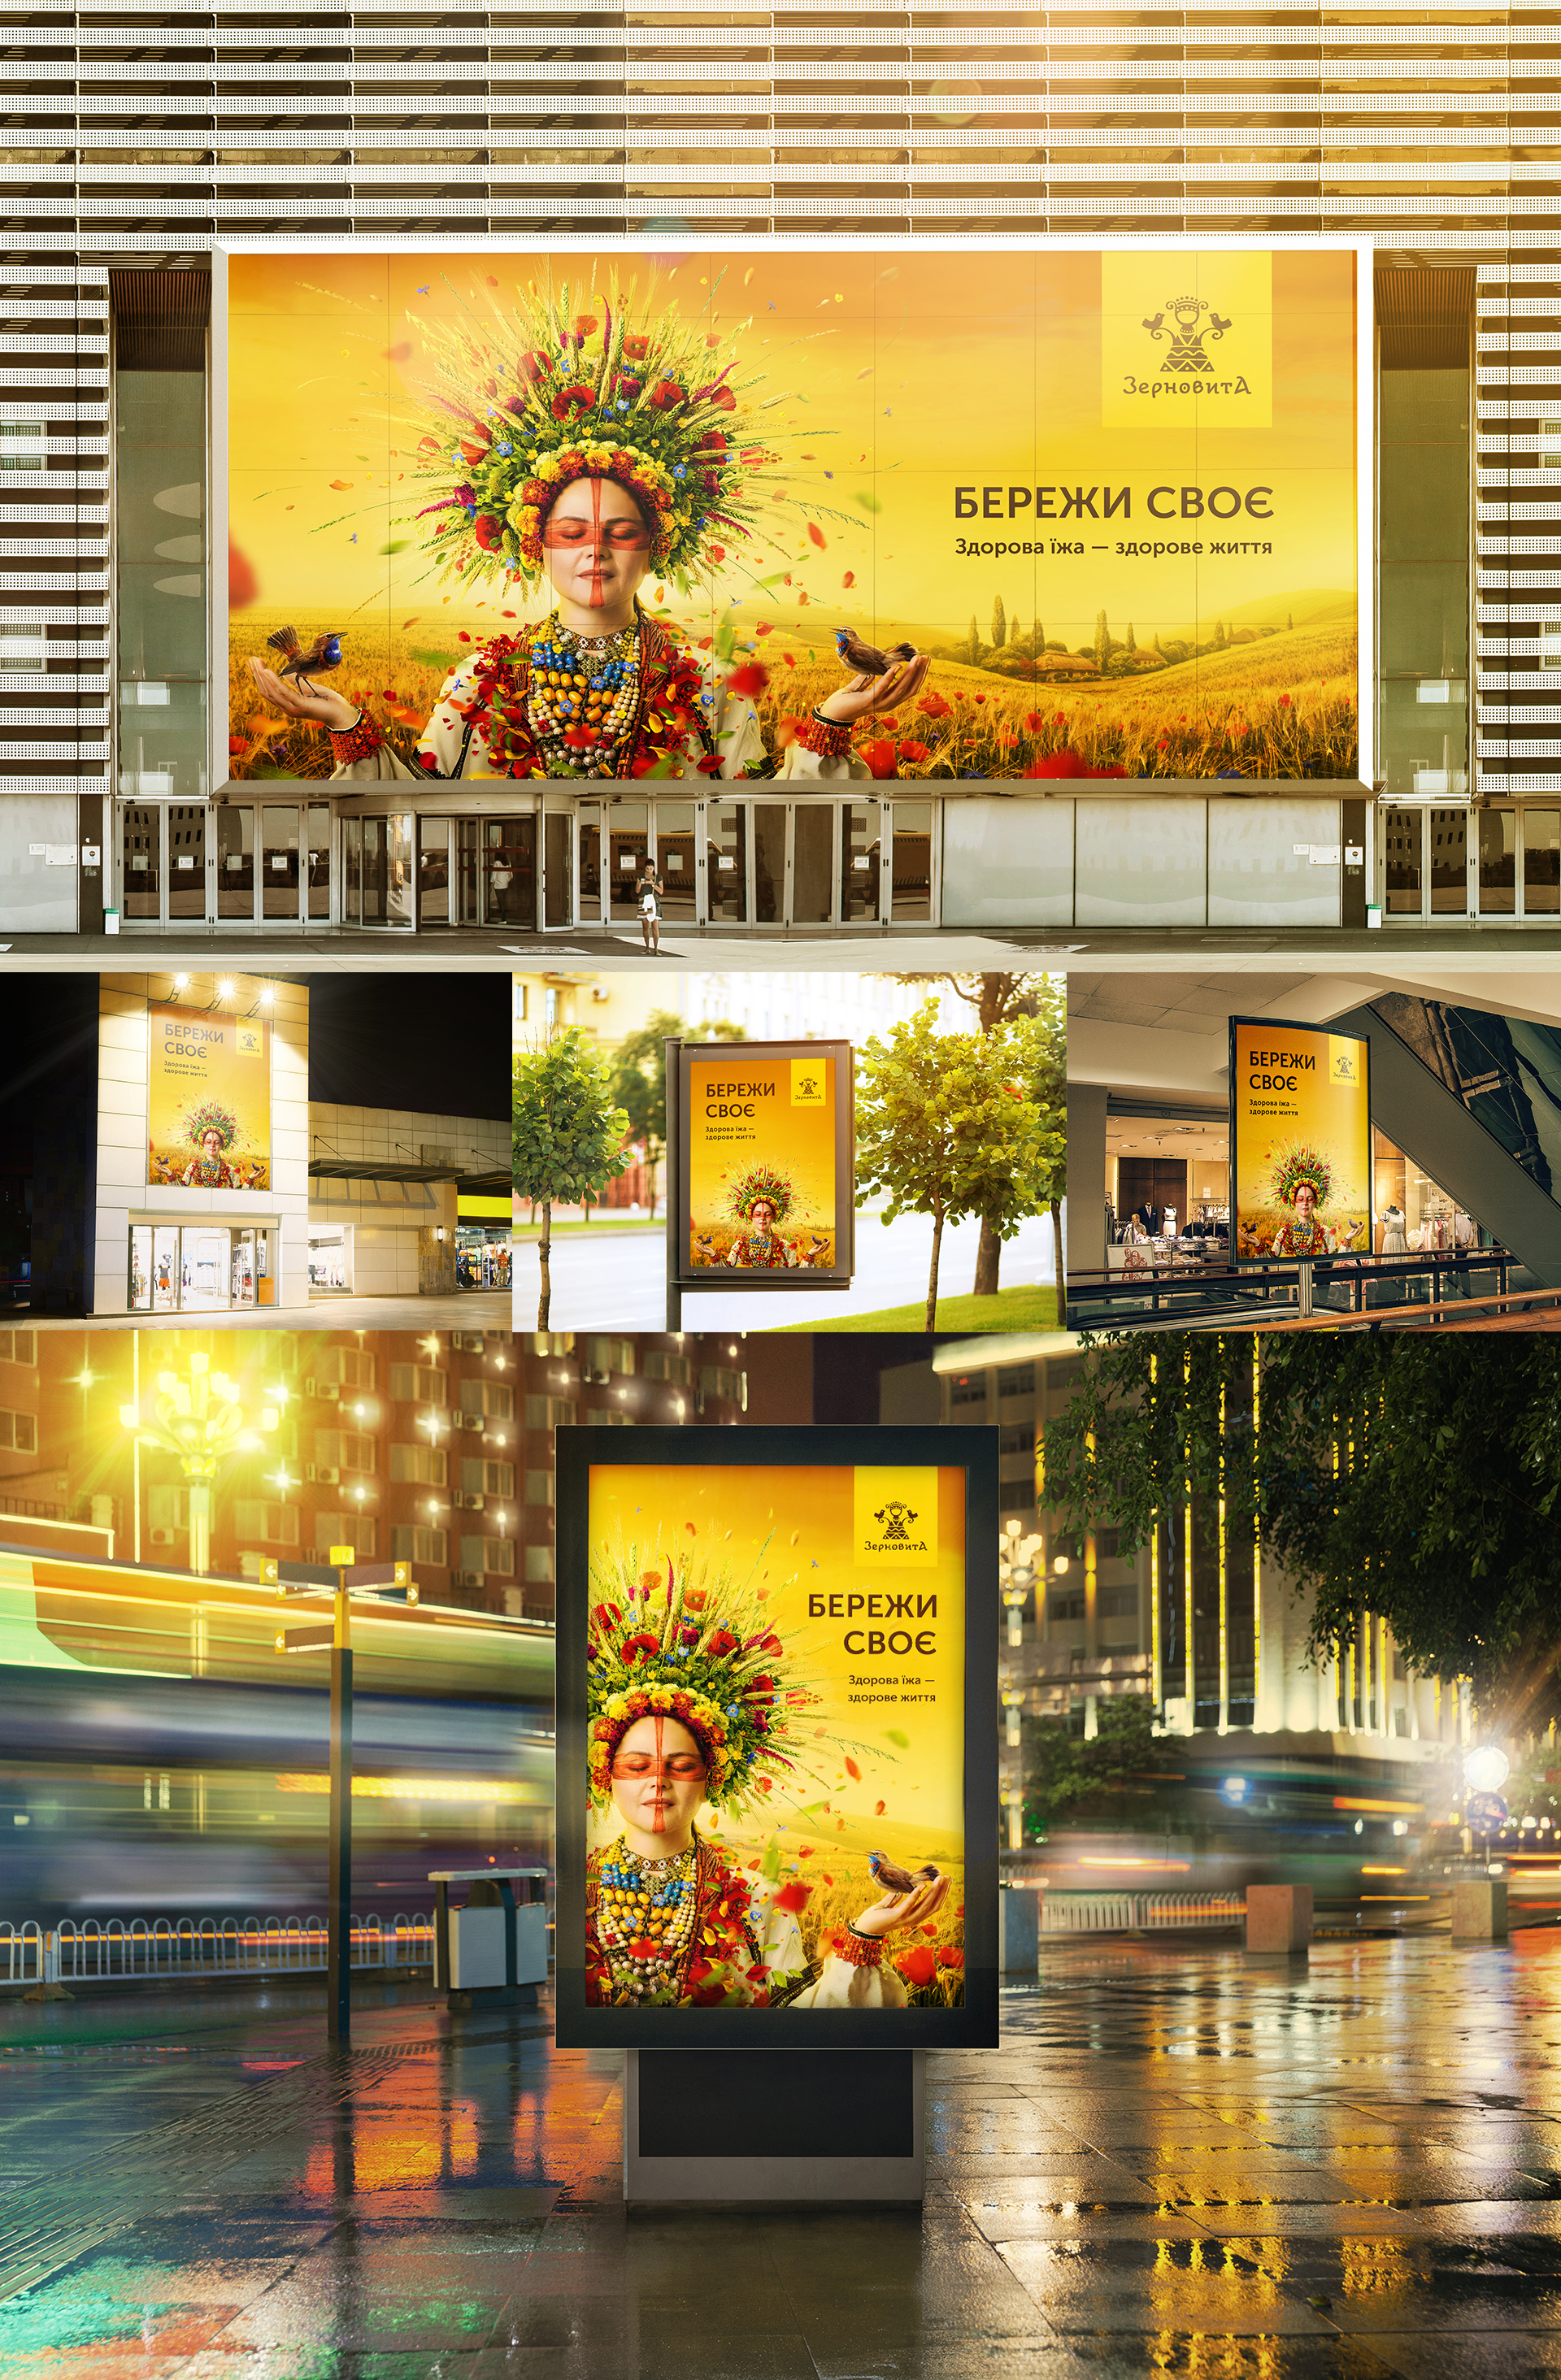 A billboard program showing the beauty of a marketing campaign